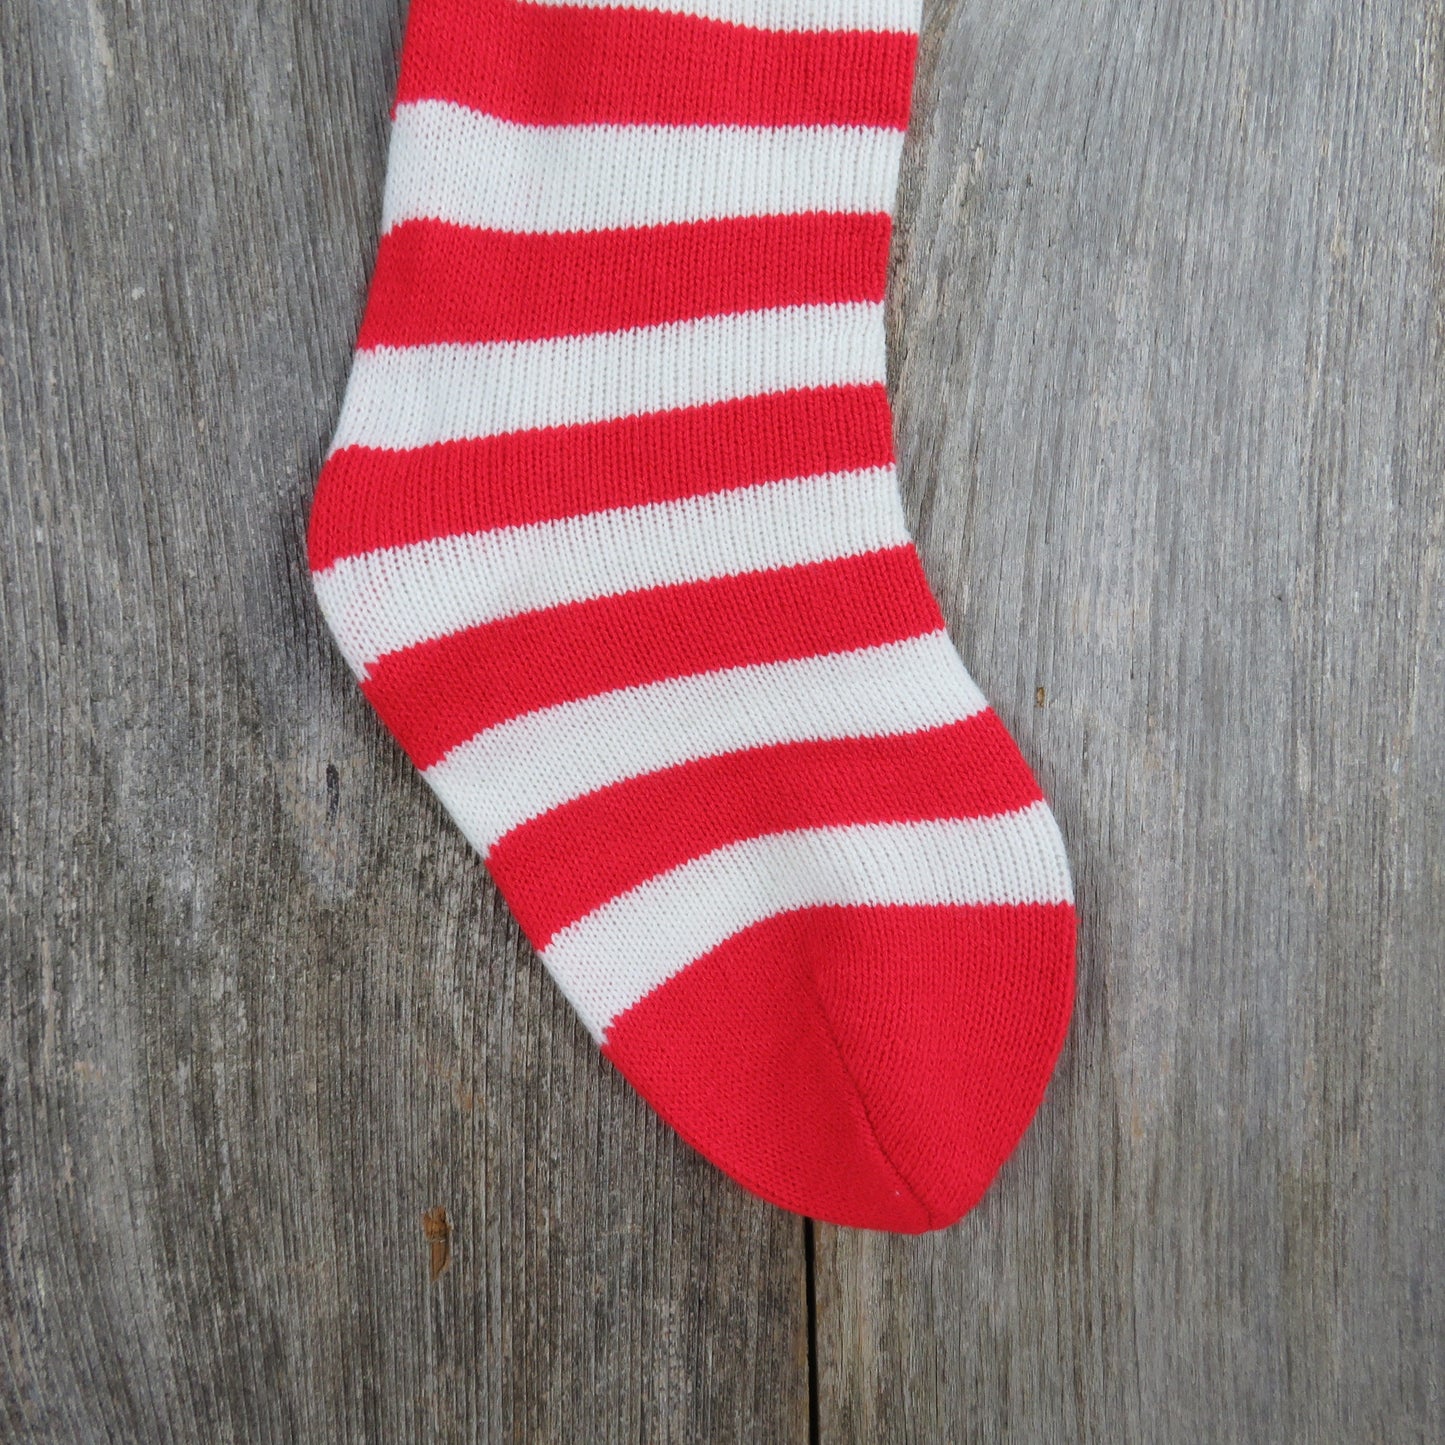 Vintage Red White Knit Striped Stocking Christmas Knitted Red Stripes ST310a